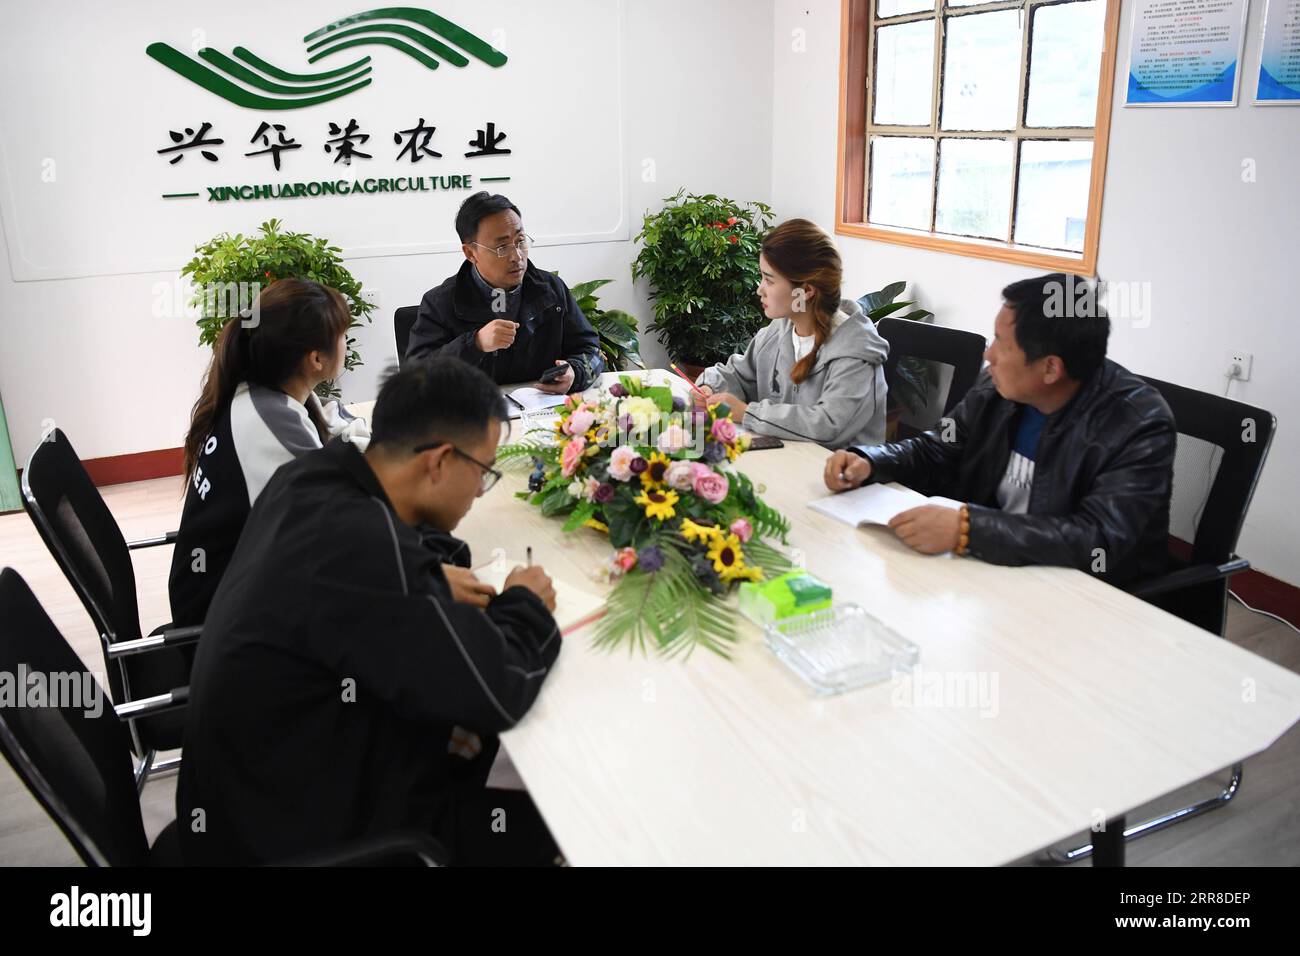 210503 -- TIANSHUI, May 3, 2021 -- Zhang Shuhao hosts a meeting with other members of his team at Xinghuarong, an agriculture company in Mudan Township, Tianshui City of northwest China s Gansu Province, on April 27, 2021. Zhang Shuhao, 42, quit his well-paid job three years ago to start an agriculture company with a few partners sharing the same vision at a mountainous village in Mudan Township, Tianshui City. In three years, Xinghuarong, Zhang s company, contracted 6,200 mu about 413 hectares of idle arable lands, where terraced fields, greenhouses, and a reservoir have been built to grow di Stock Photo